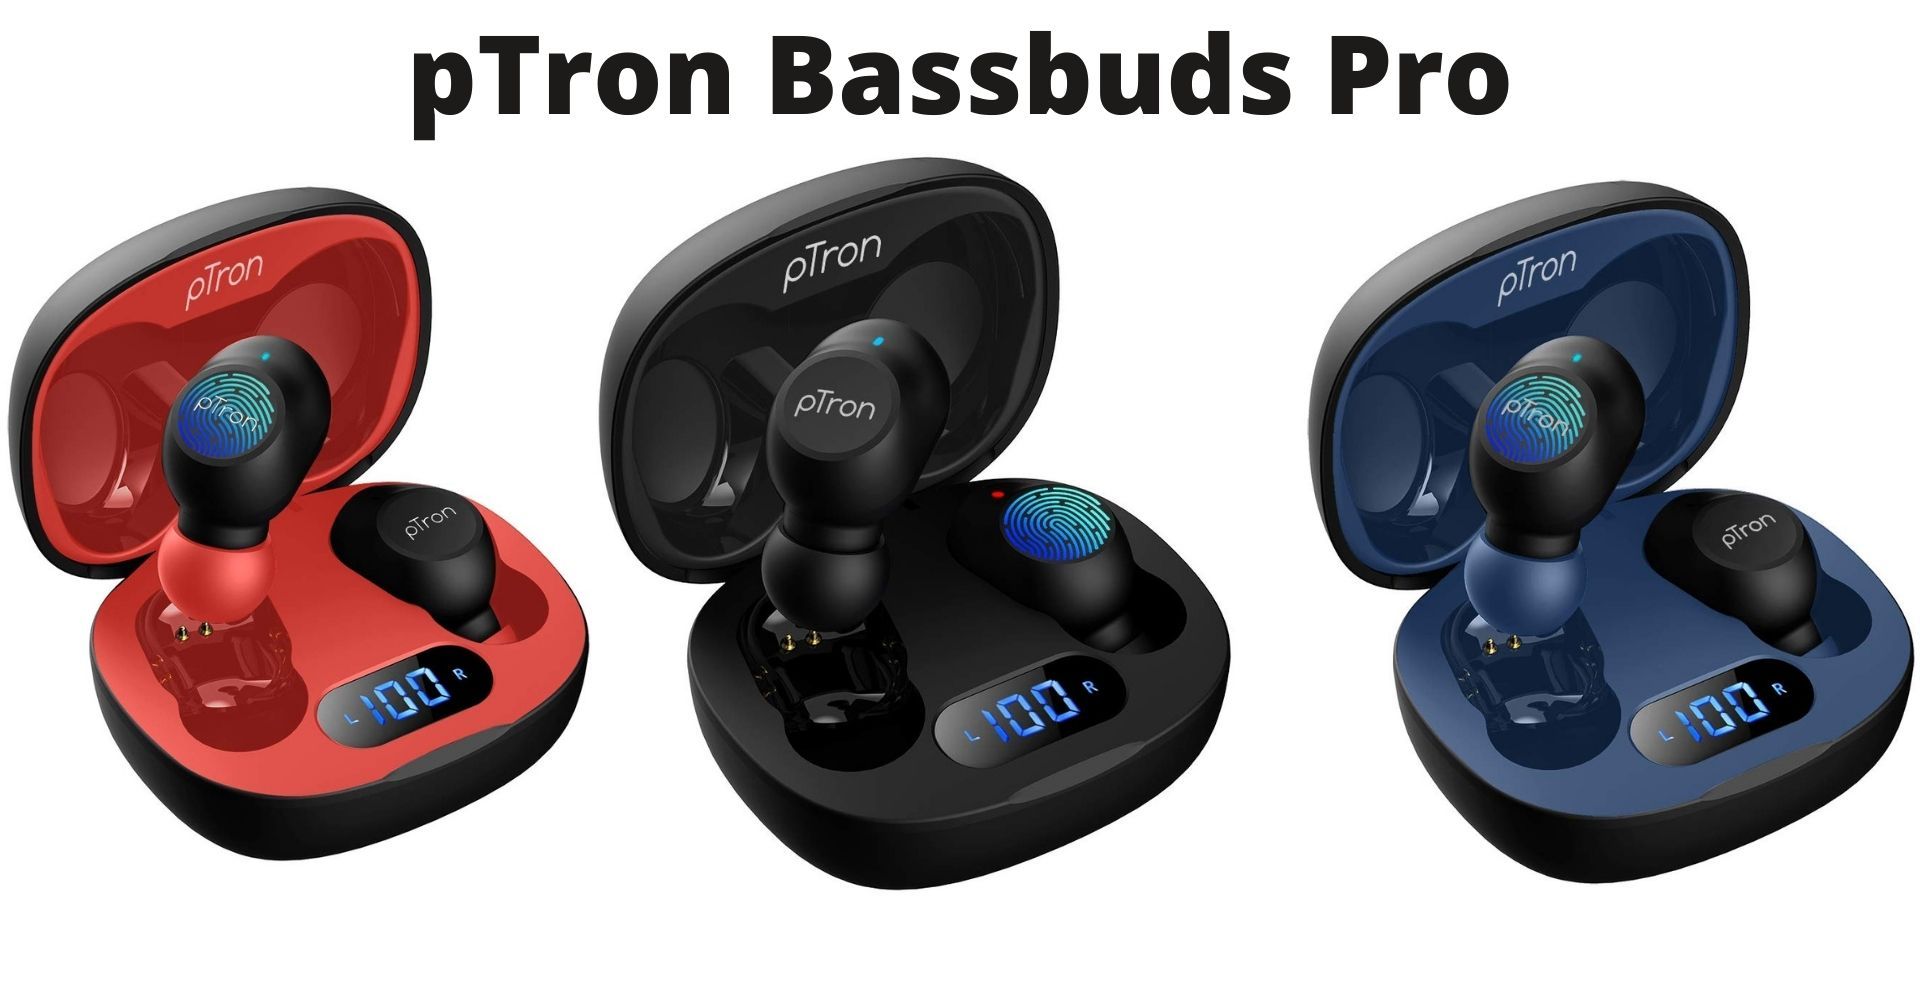 Newly Launch pTron Bassbuds Pro 2021 – Review